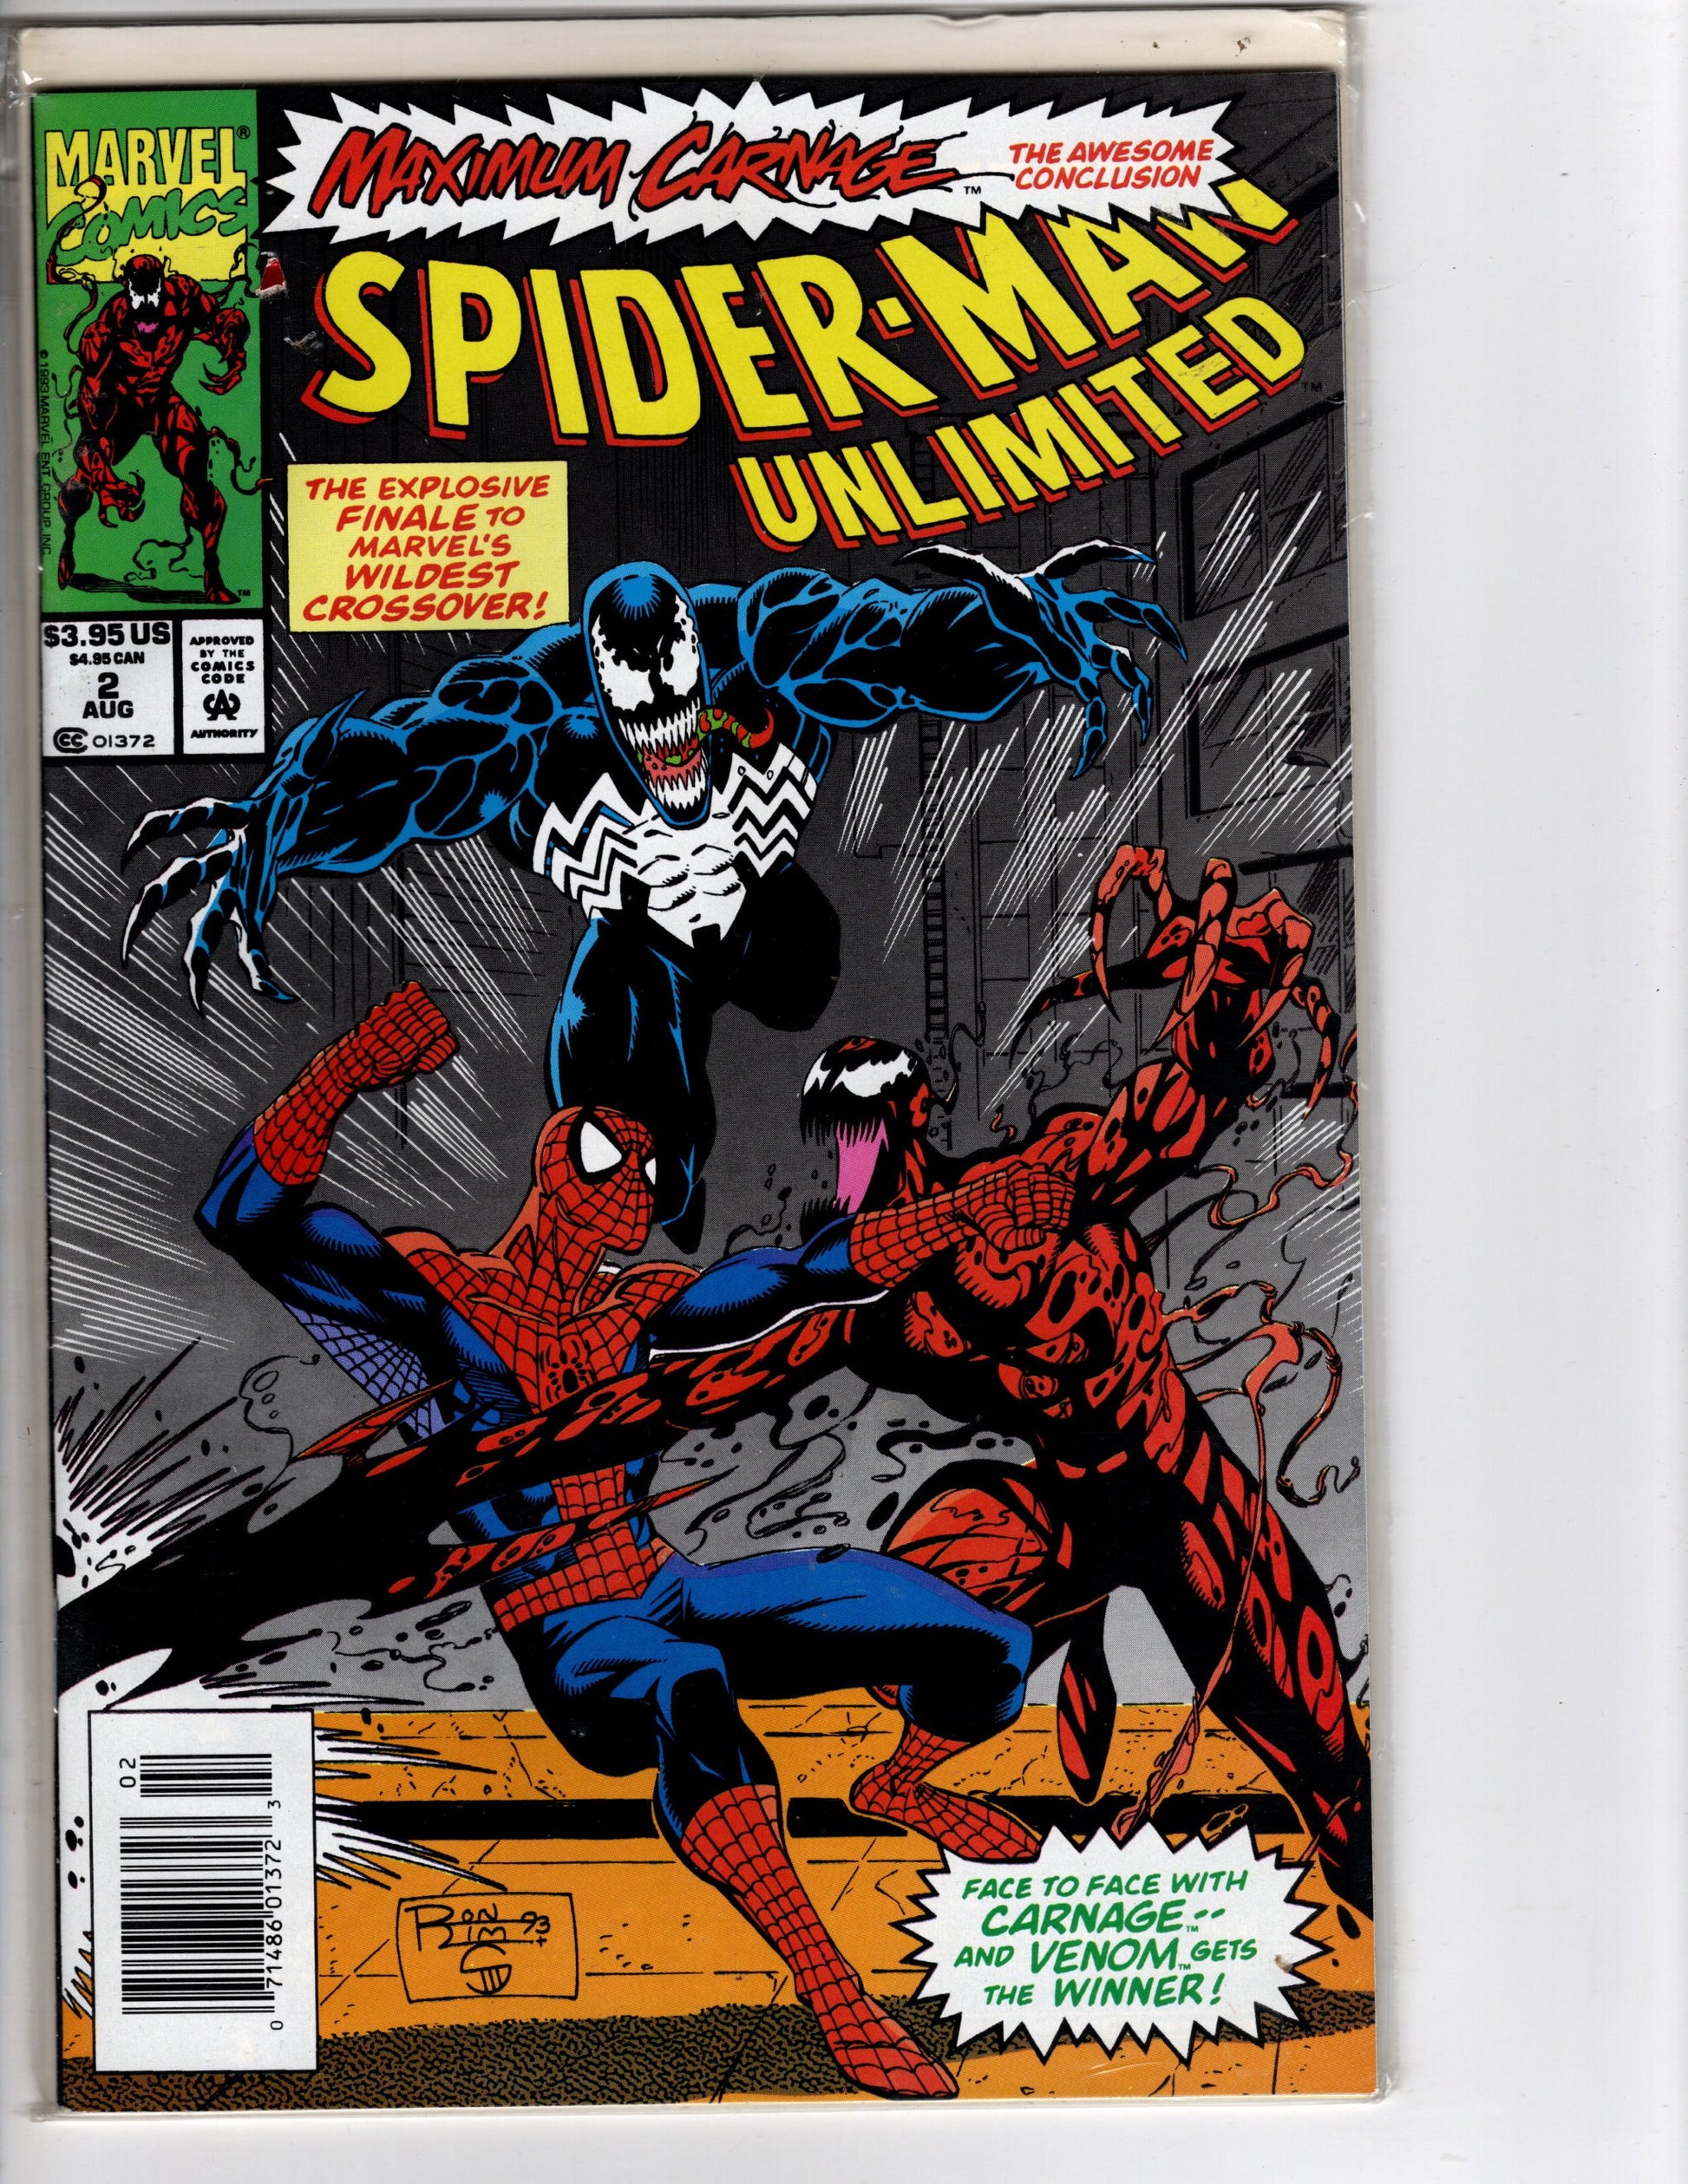 Spider-Man Unlimited #2 – Valley Town Comics